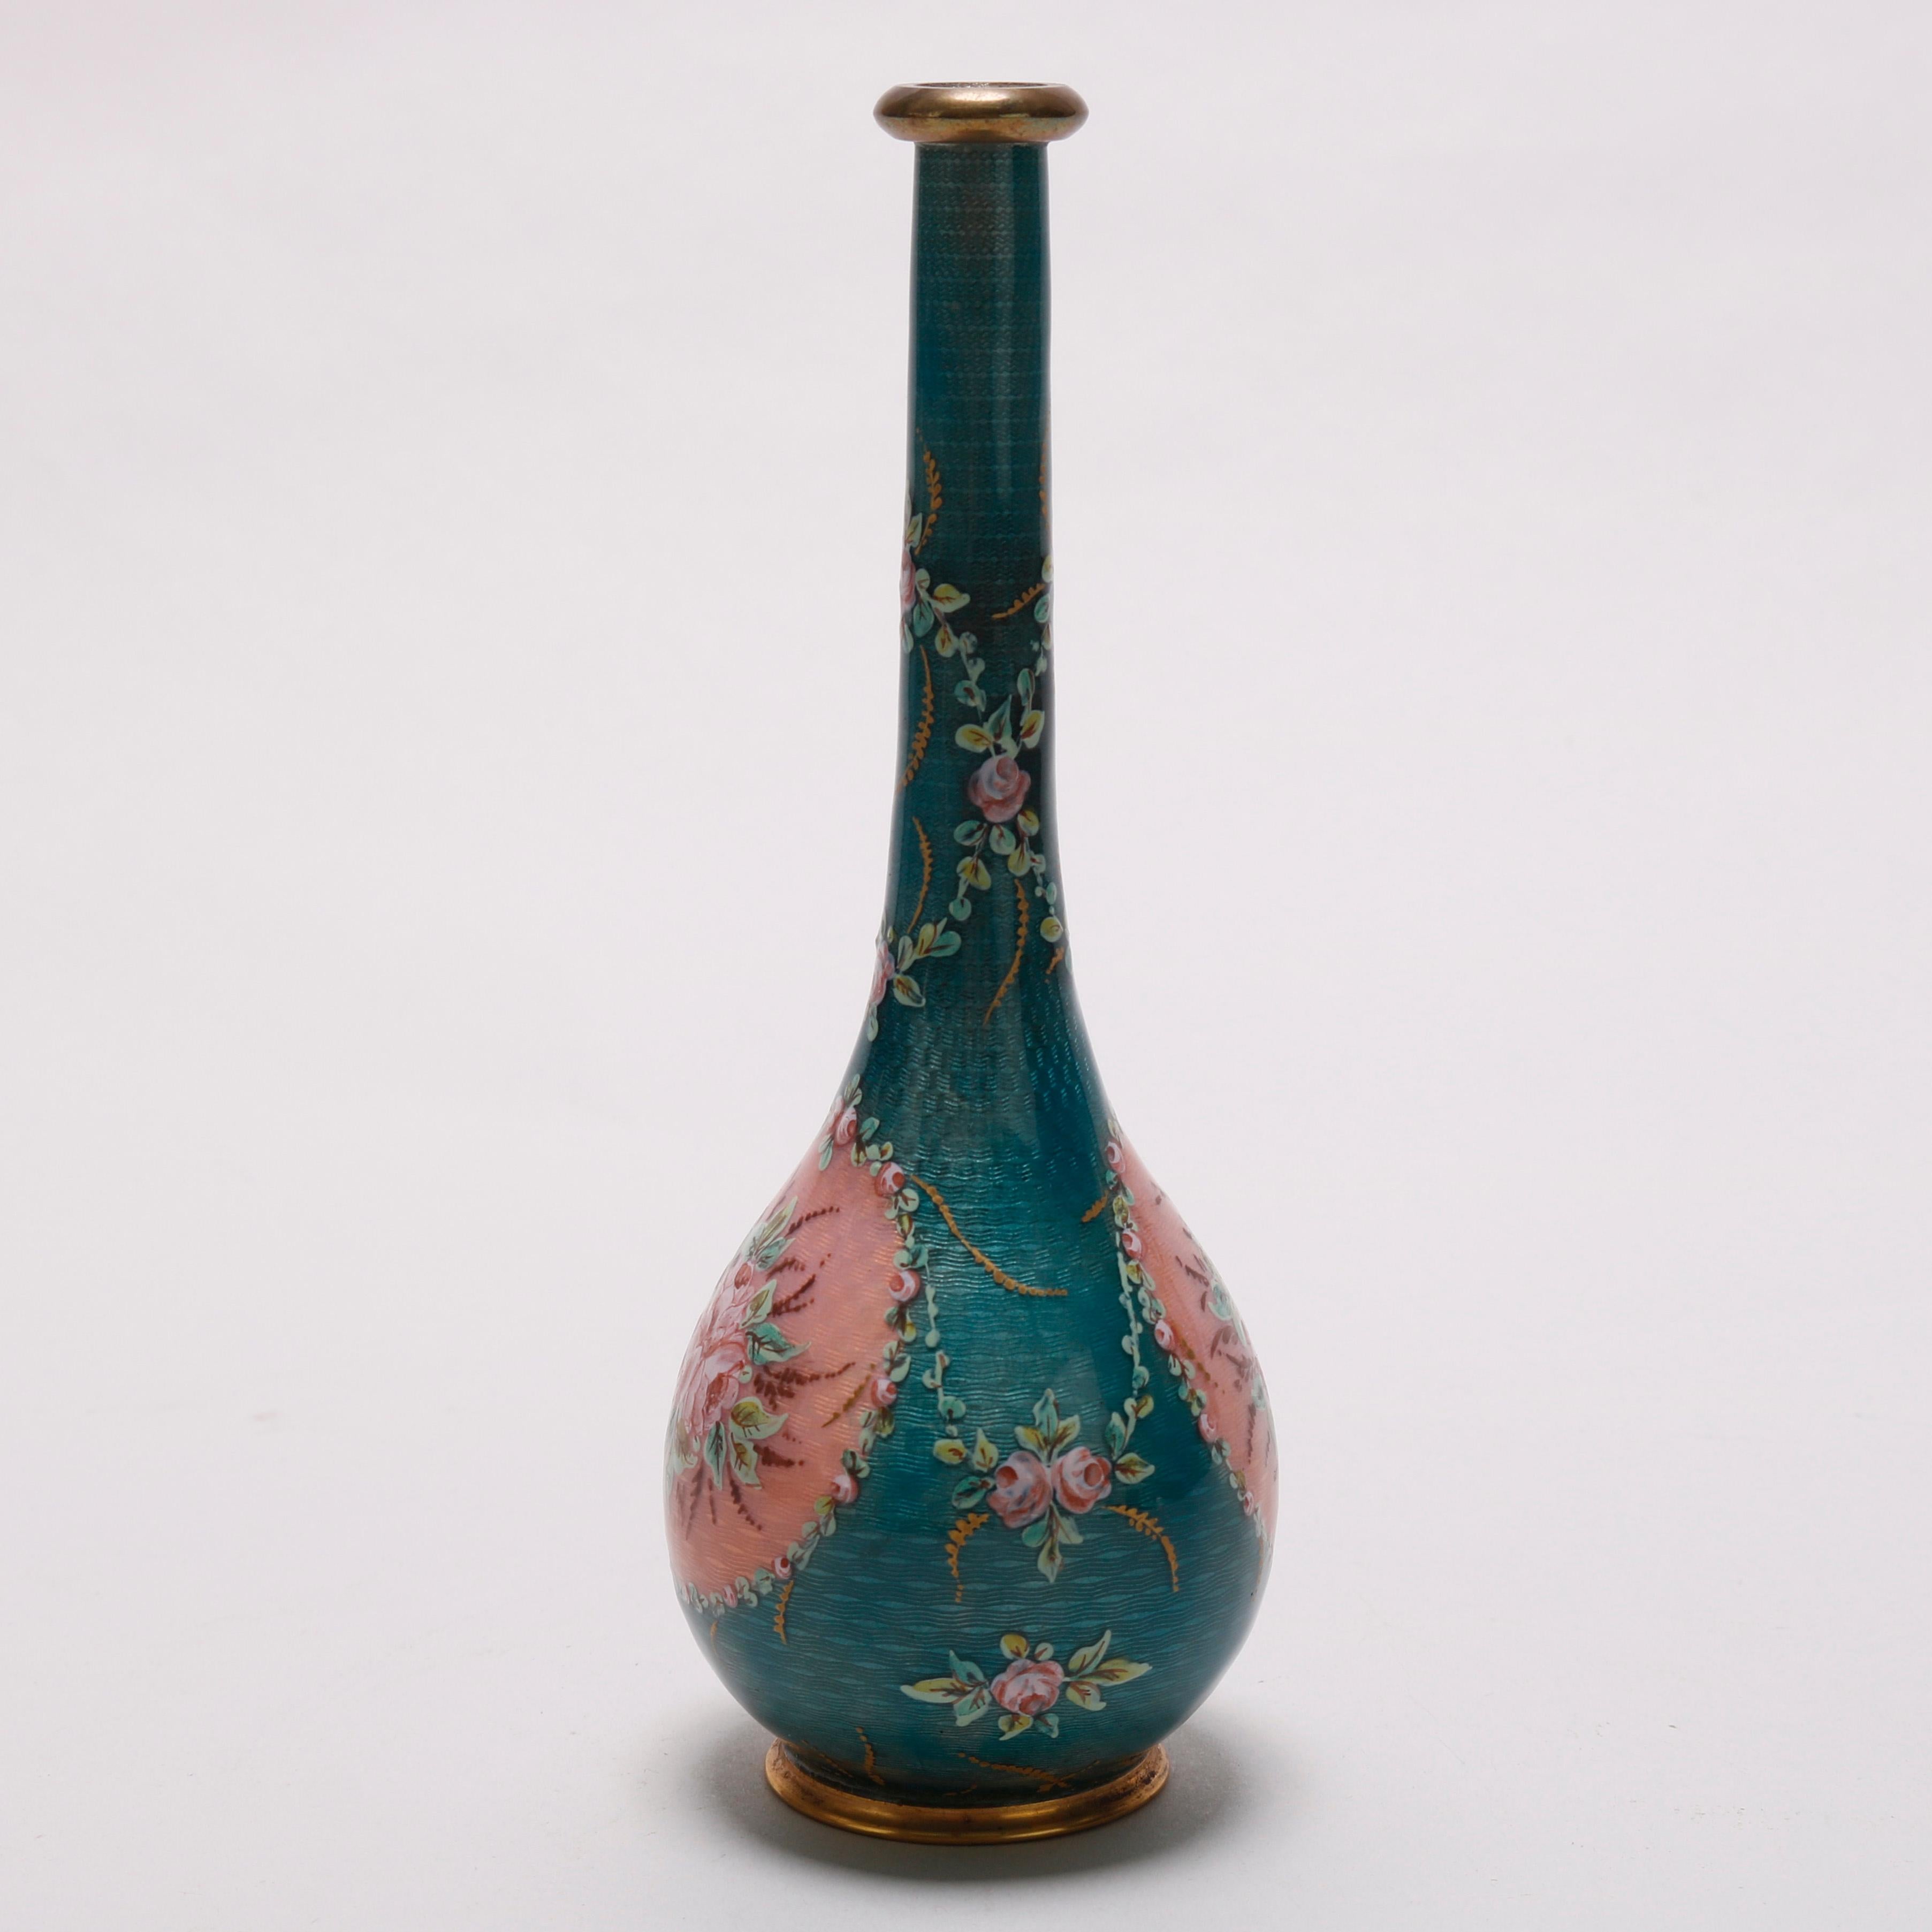 An antique French vase offers enameled Guilloche bronze with floral reserve, signed on base as photographed, circa 1900

Measures- 7.25